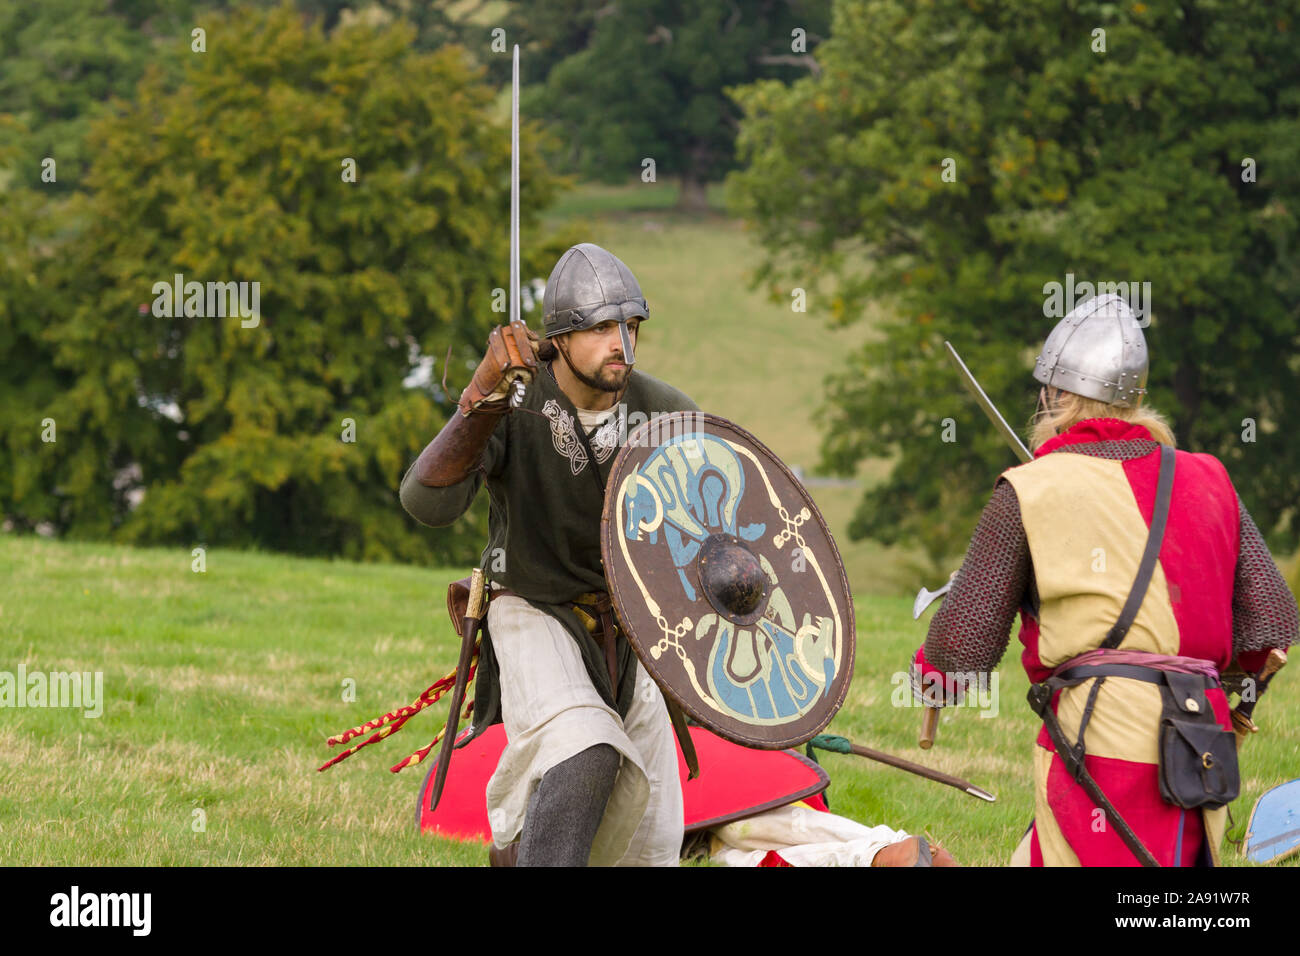 Medieval re-enactors dressed in Welsh and English armour and costumes of the 12th century equipped with weapons simulating combat of the period Stock Photo